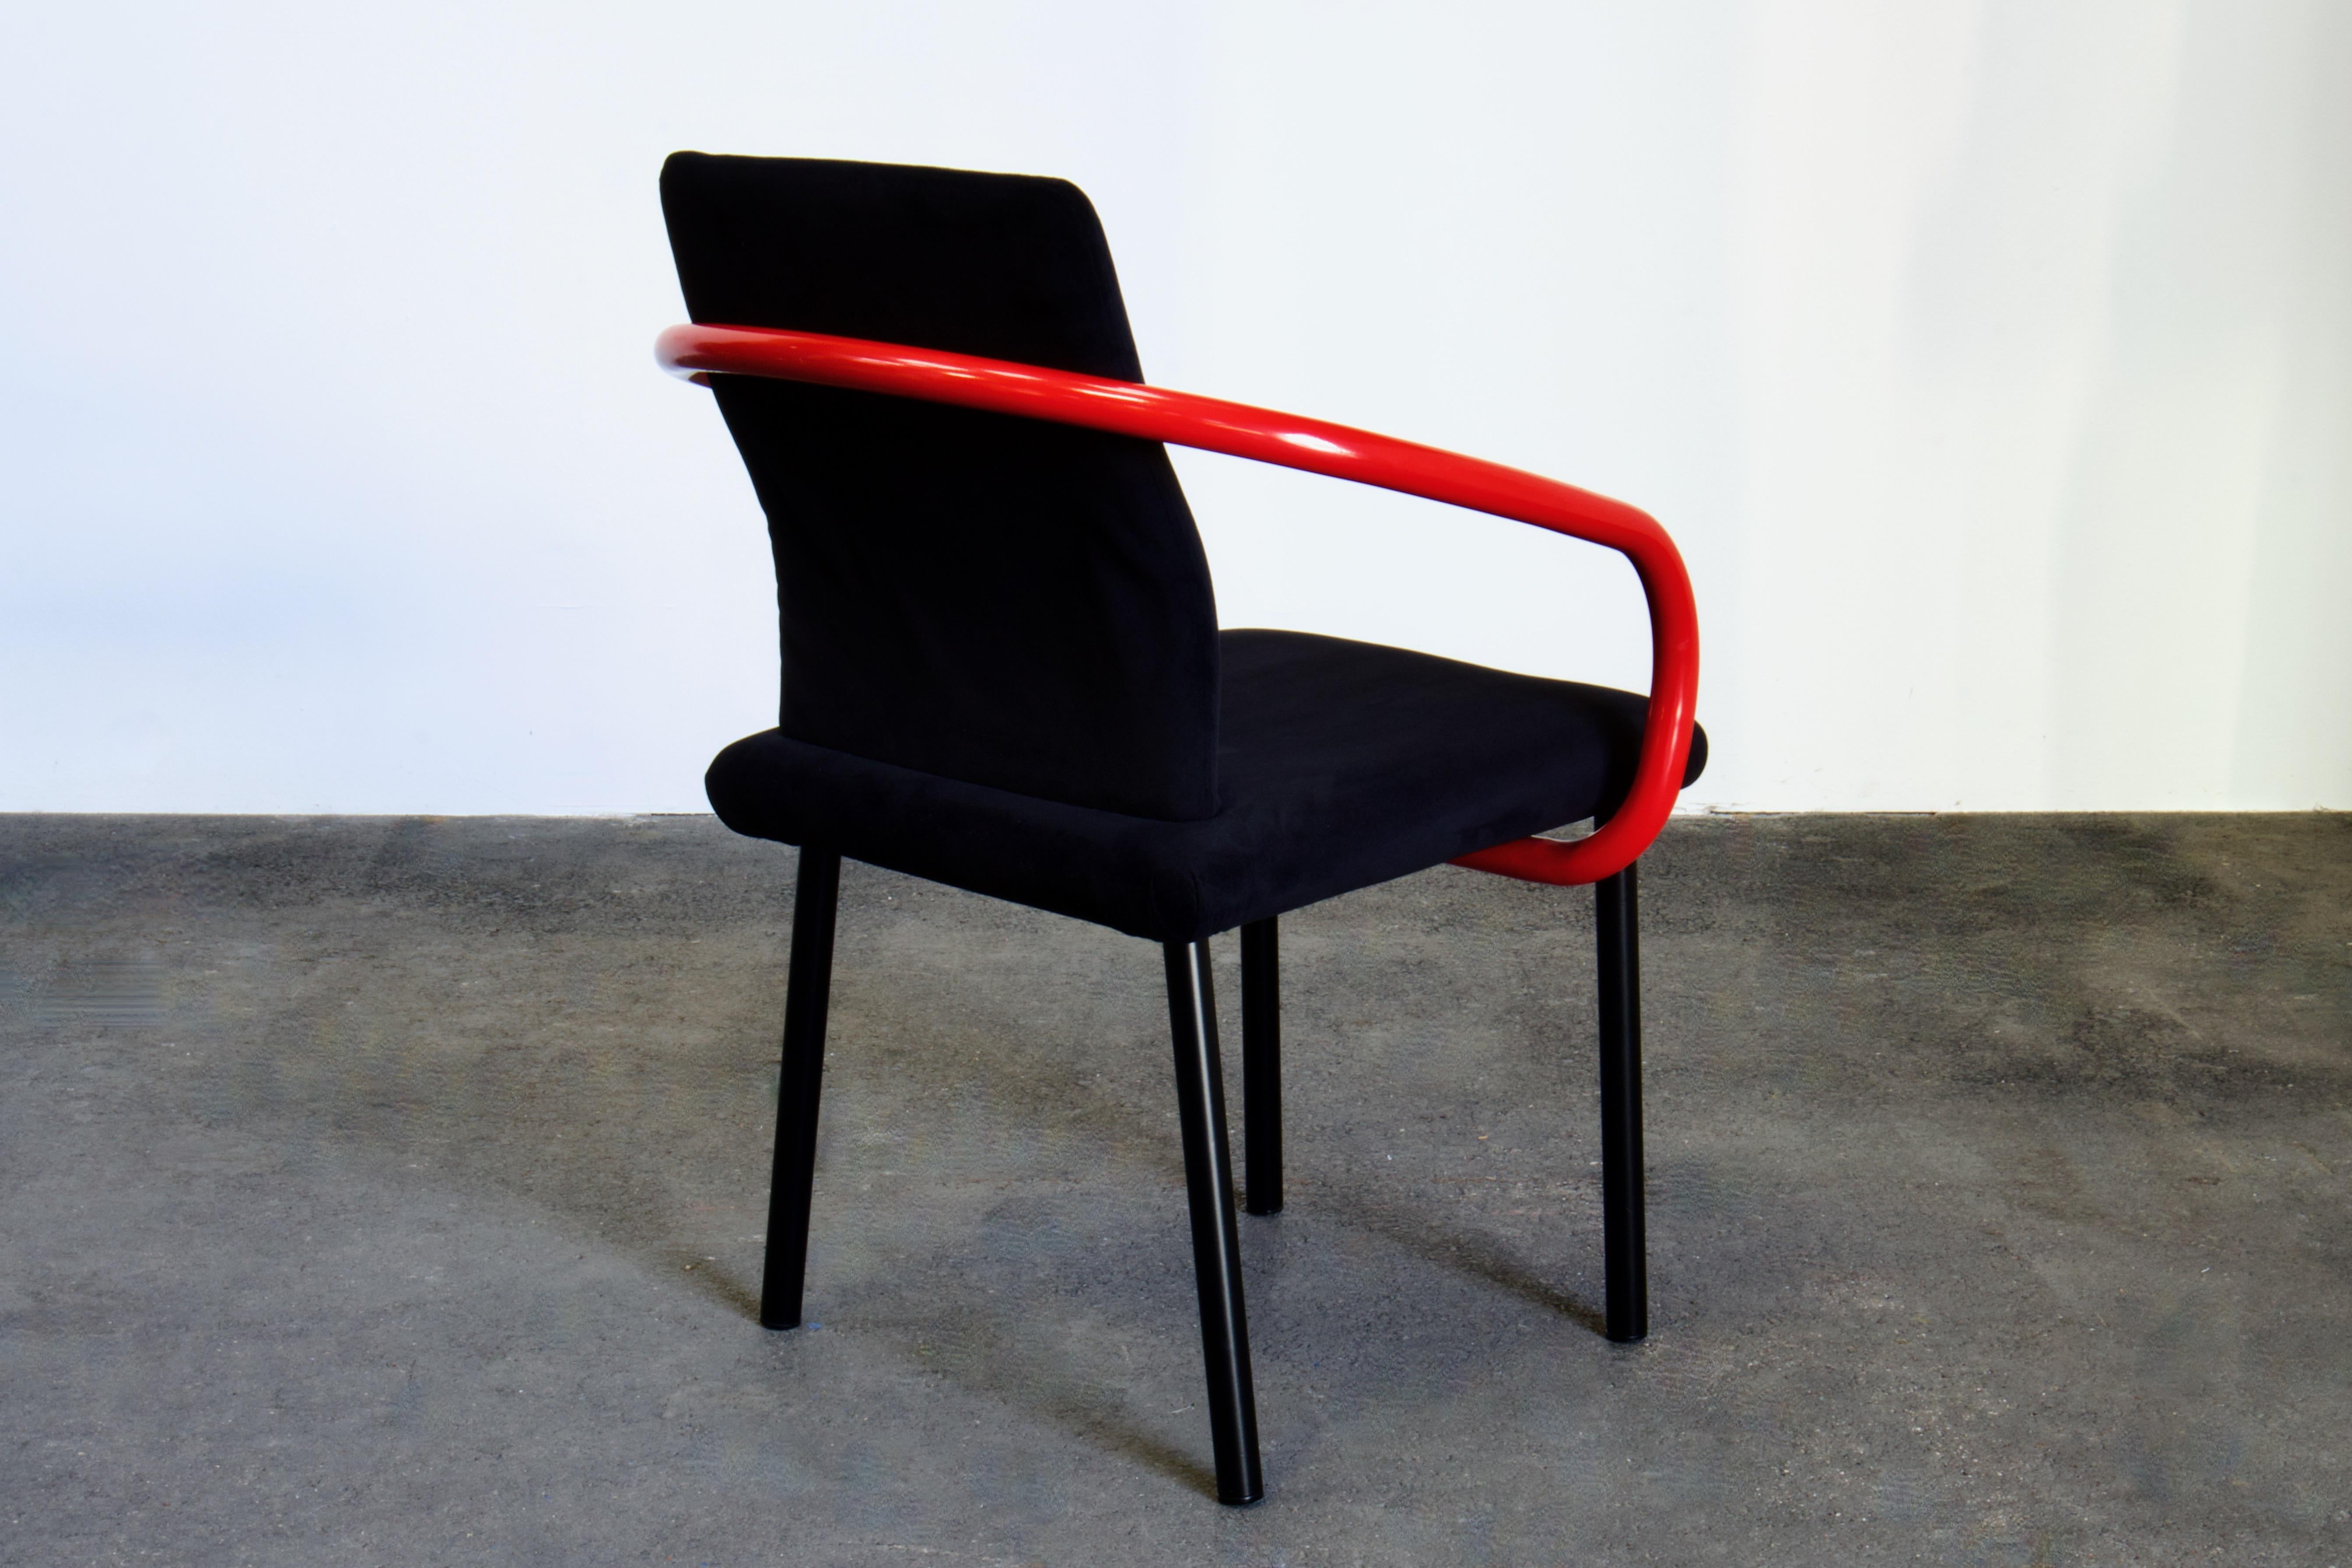 Metal Four Ettore Sottsass Mandarin Chairs for Knoll in Red & Black, 1986 Italy For Sale